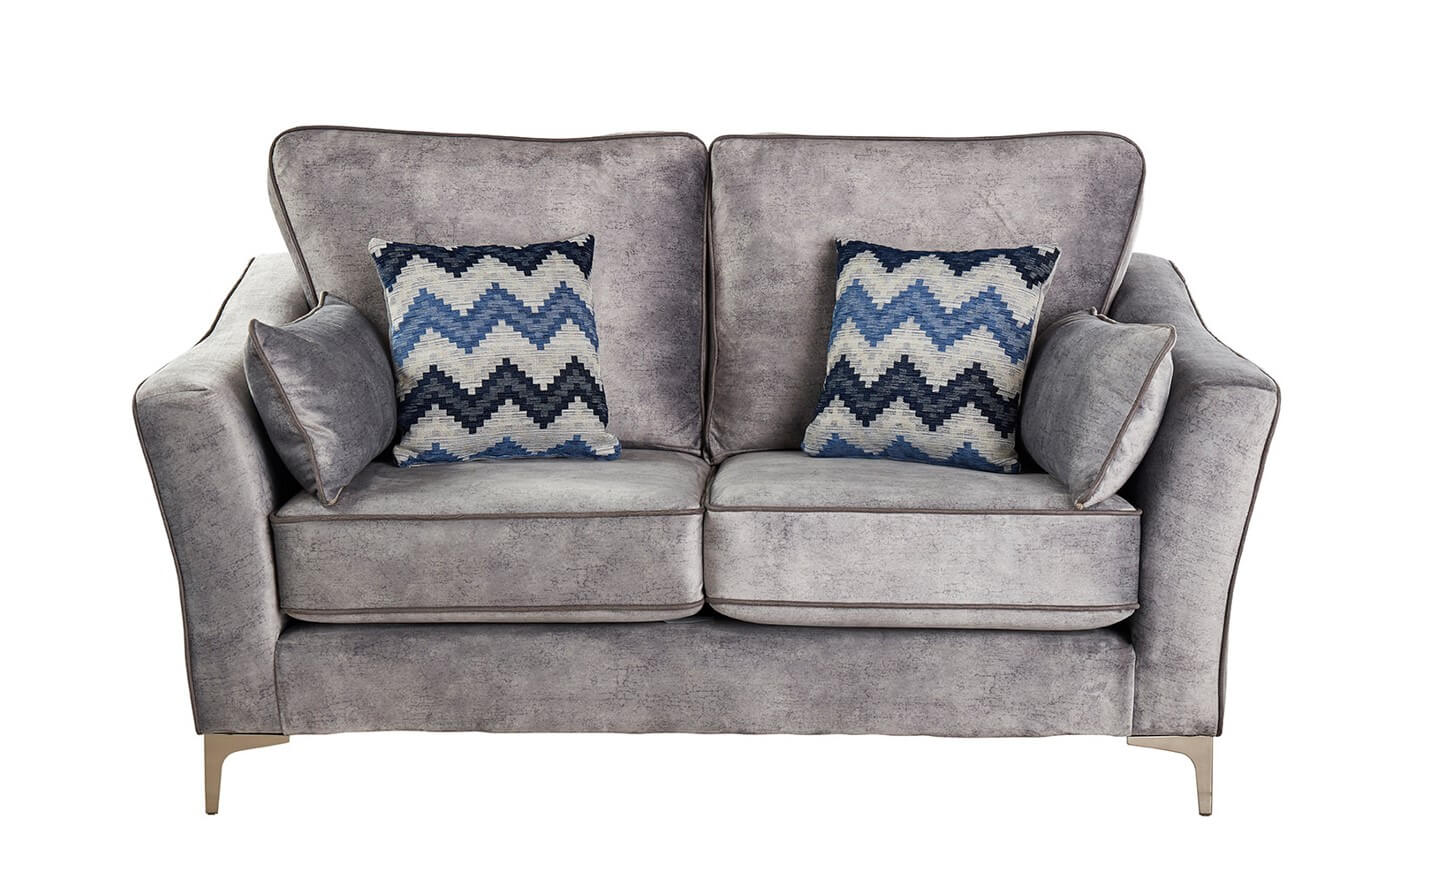 Finding Affordable Comfort: Exploring Budget-Friendly Sofa Choices  %Post Title